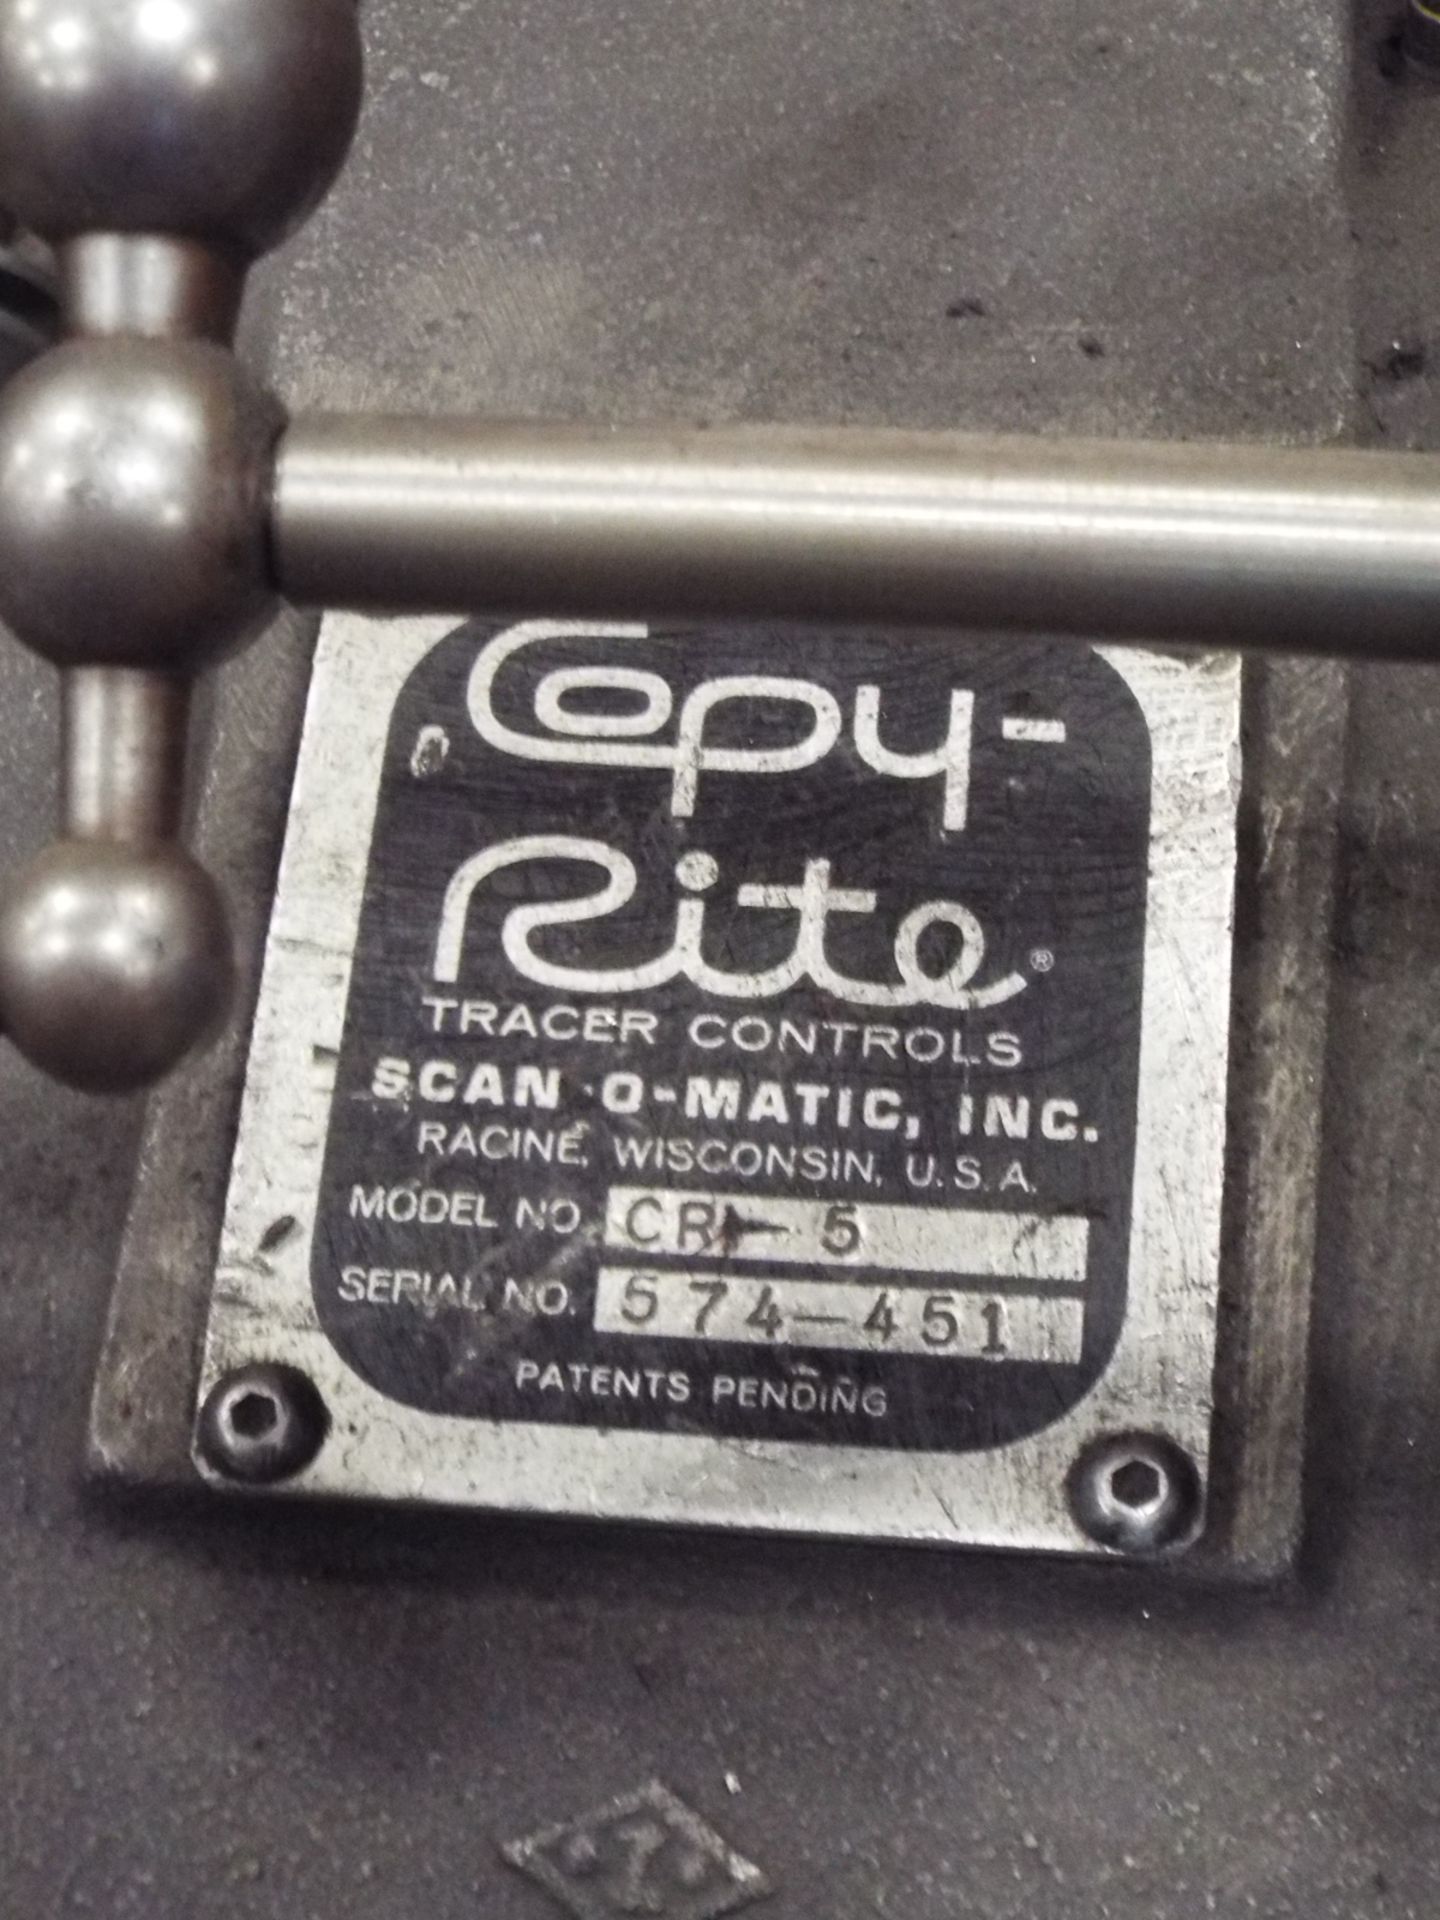 COPY-RITE CR-5 HYDRAULIC TRACER ATTACHMENT WITH CART - Image 2 of 4